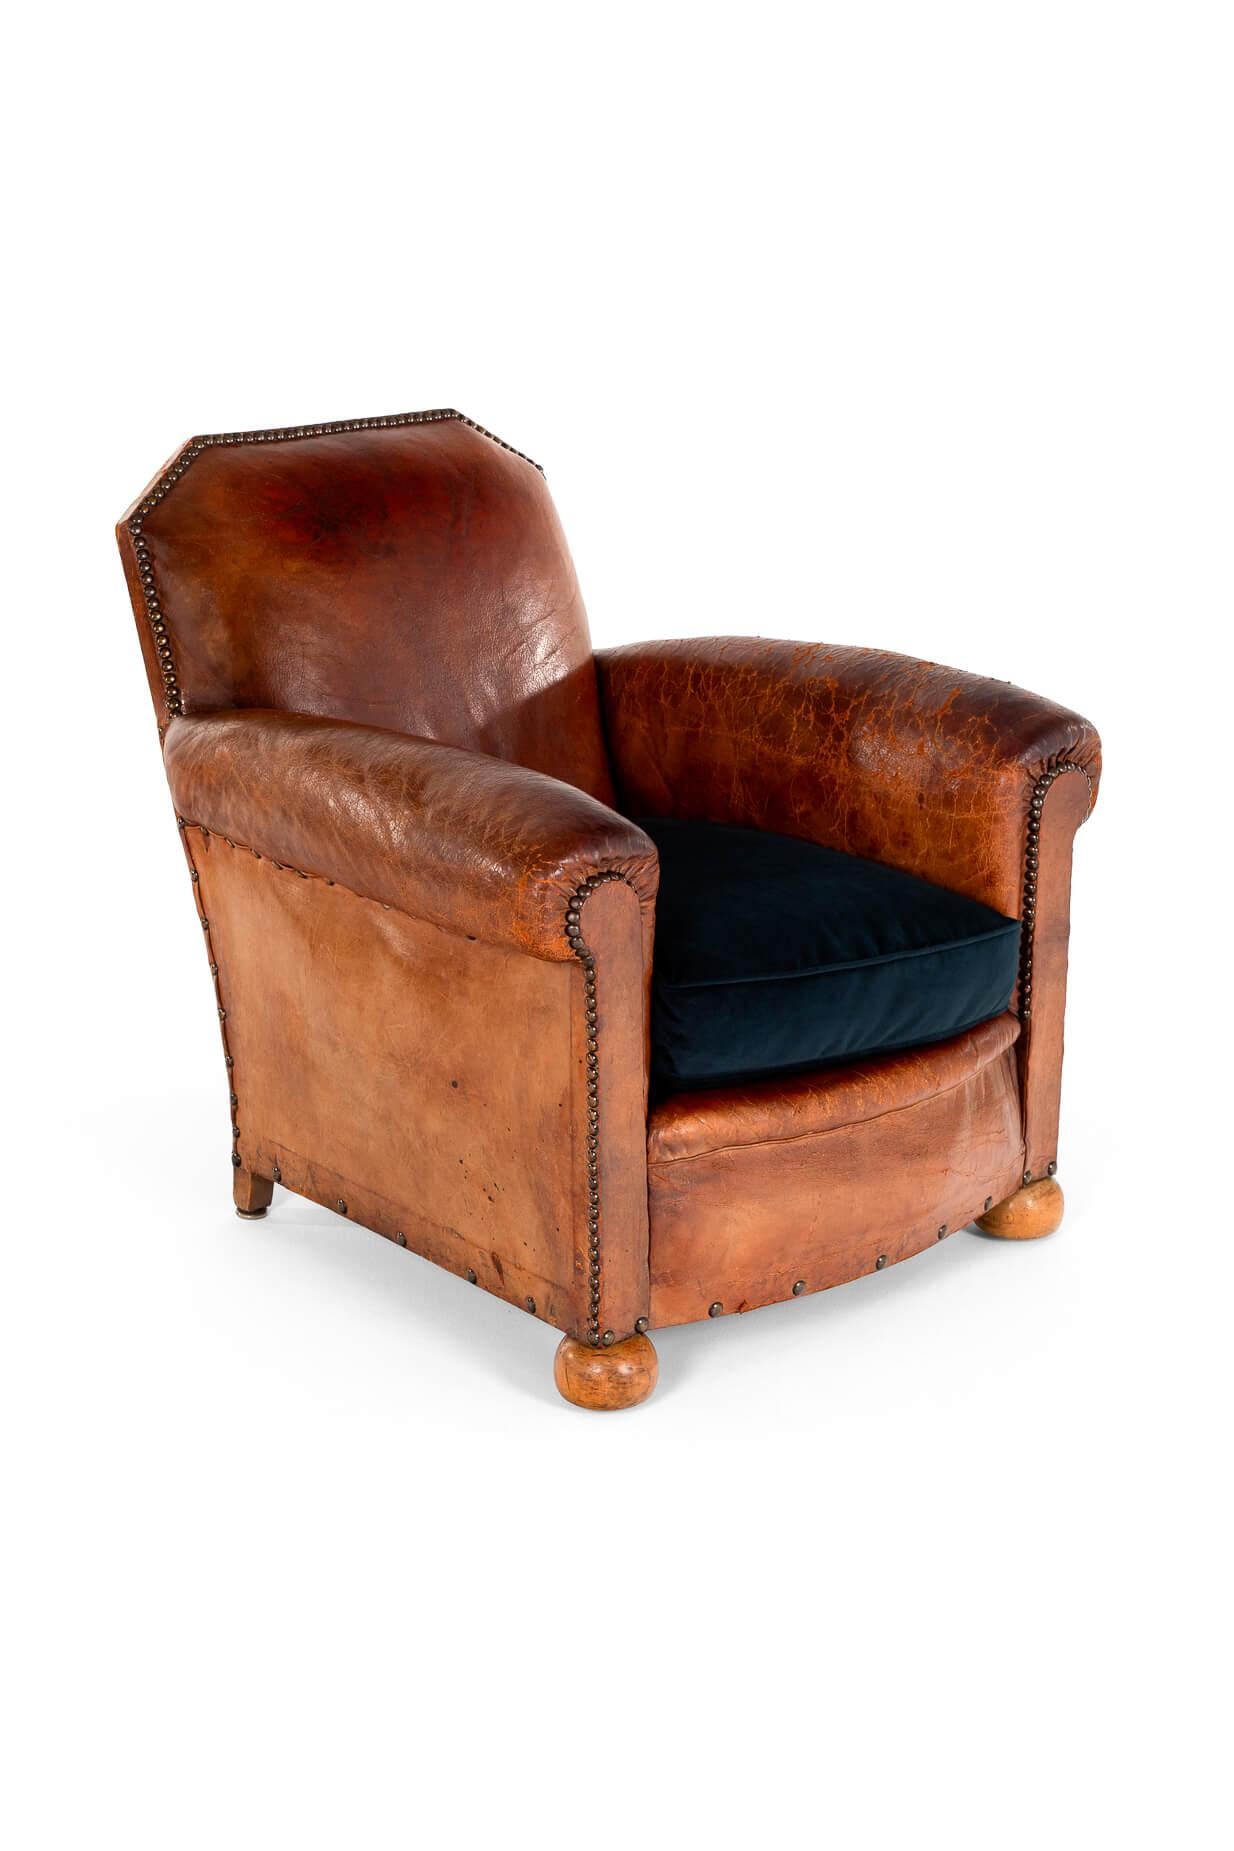 A sumptuous cognac leather club chair with rolled arms and a wide and deep seat. The high deep back is unusual with its symmetrical angular back.

The supple leather with brass studs to the perimeters of the chair and raised on oak bun feet.

Fully